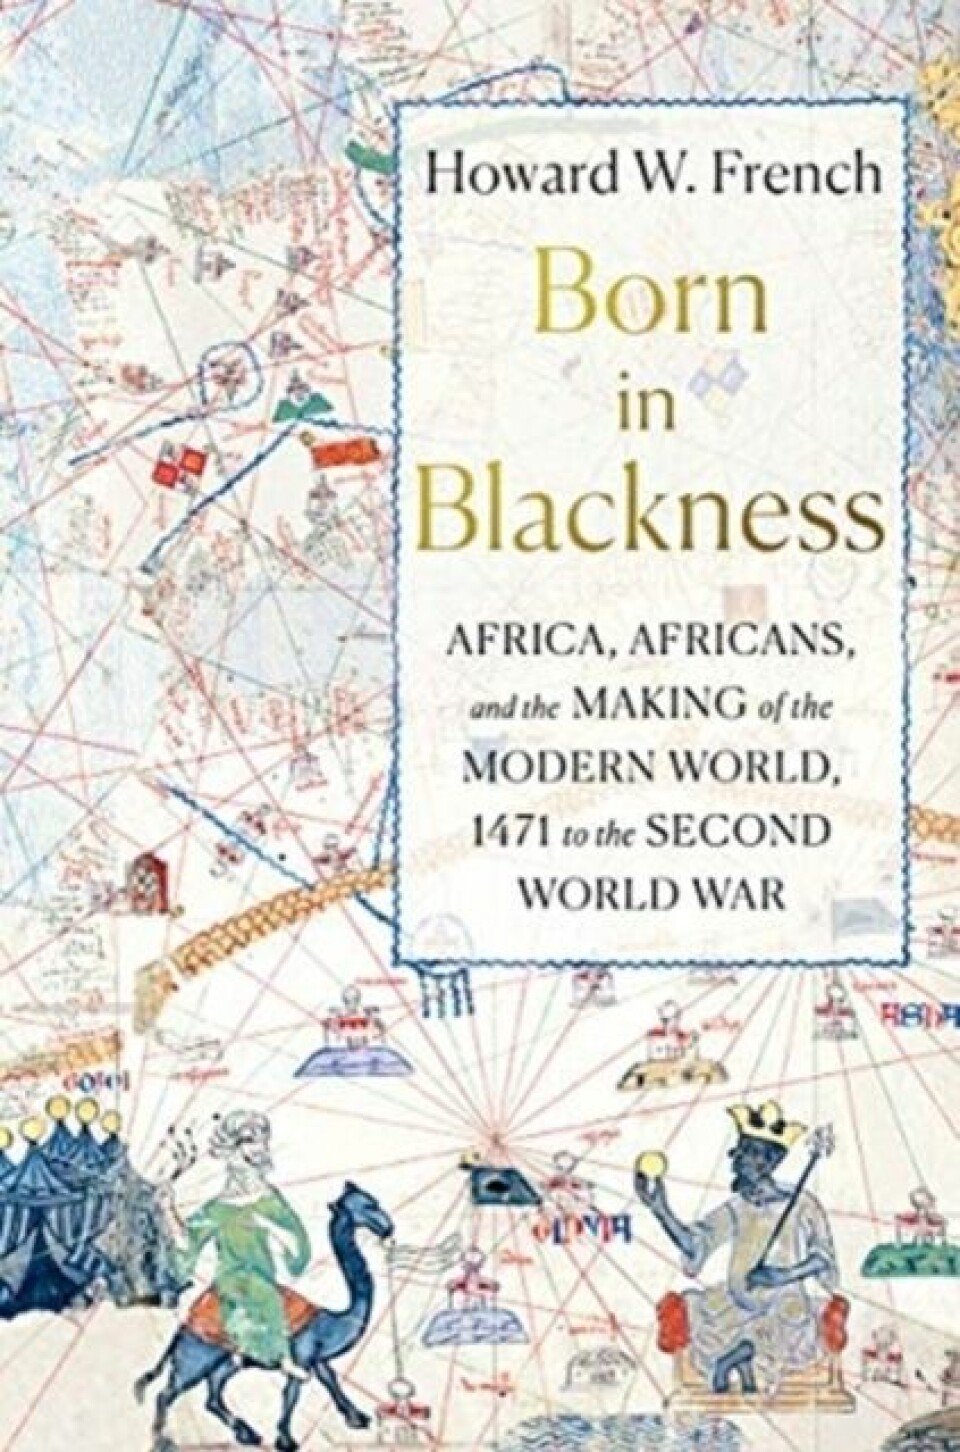 Howard W. French: Born in Blackness. Africa, Africans and the making of the modern world, 1471 to the Second World War. Liveright Publishing Corporation, New York 2021